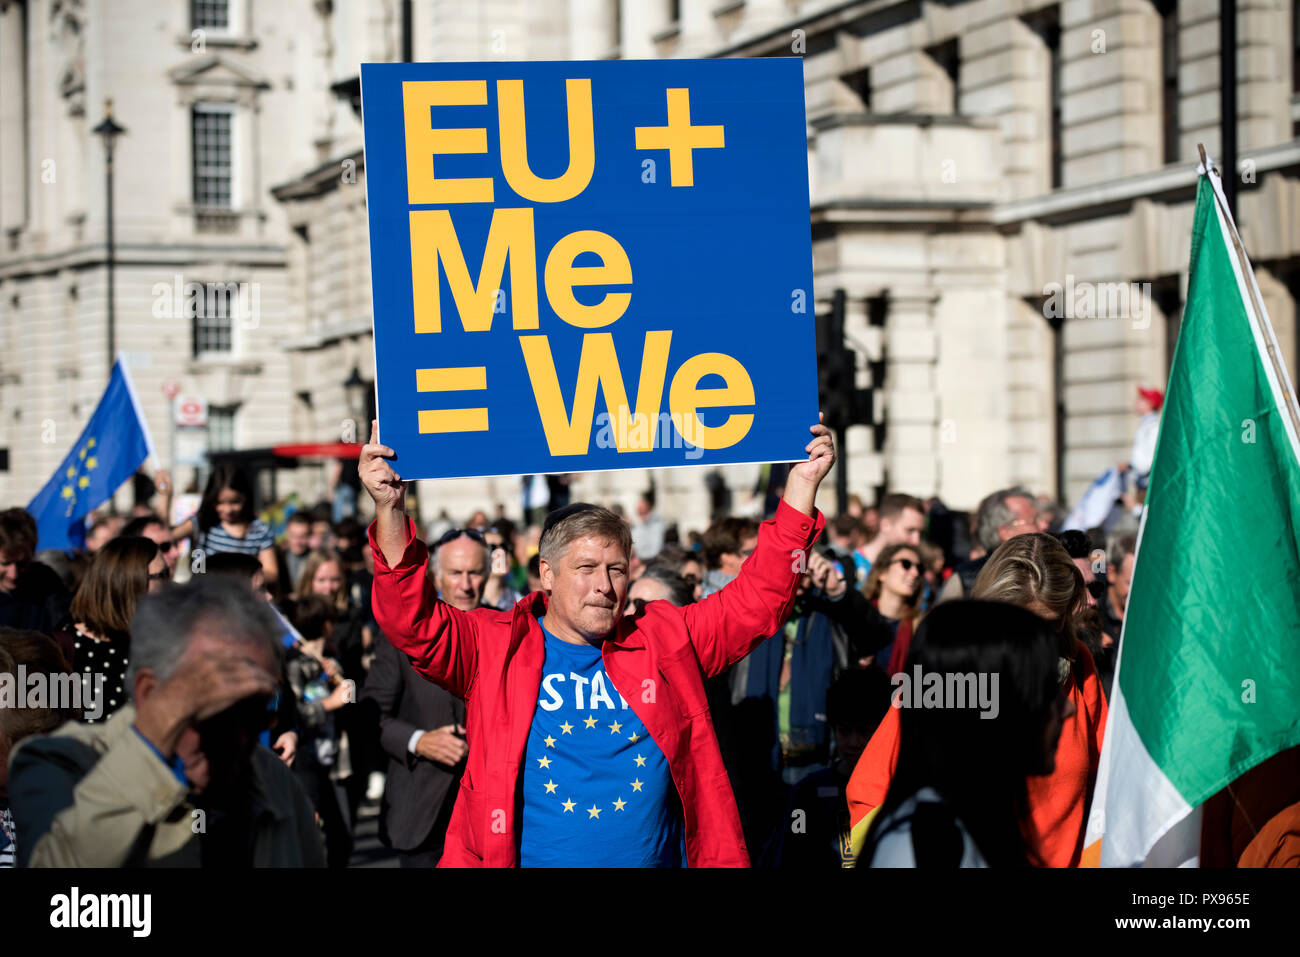 London, UK. 20th Oct, 2018. Anti Brexit Peoples March calling for a second referendum Vote on leaving the EU. London 20 Oct 2018 More than 670,000 anti brexit pro second referendum supporters marched through London and down Whitehall to protest outside the Houses of Parliament at Parliament Square in Westminster London England UK. Credit: BRIAN HARRIS/Alamy Live News Stock Photo